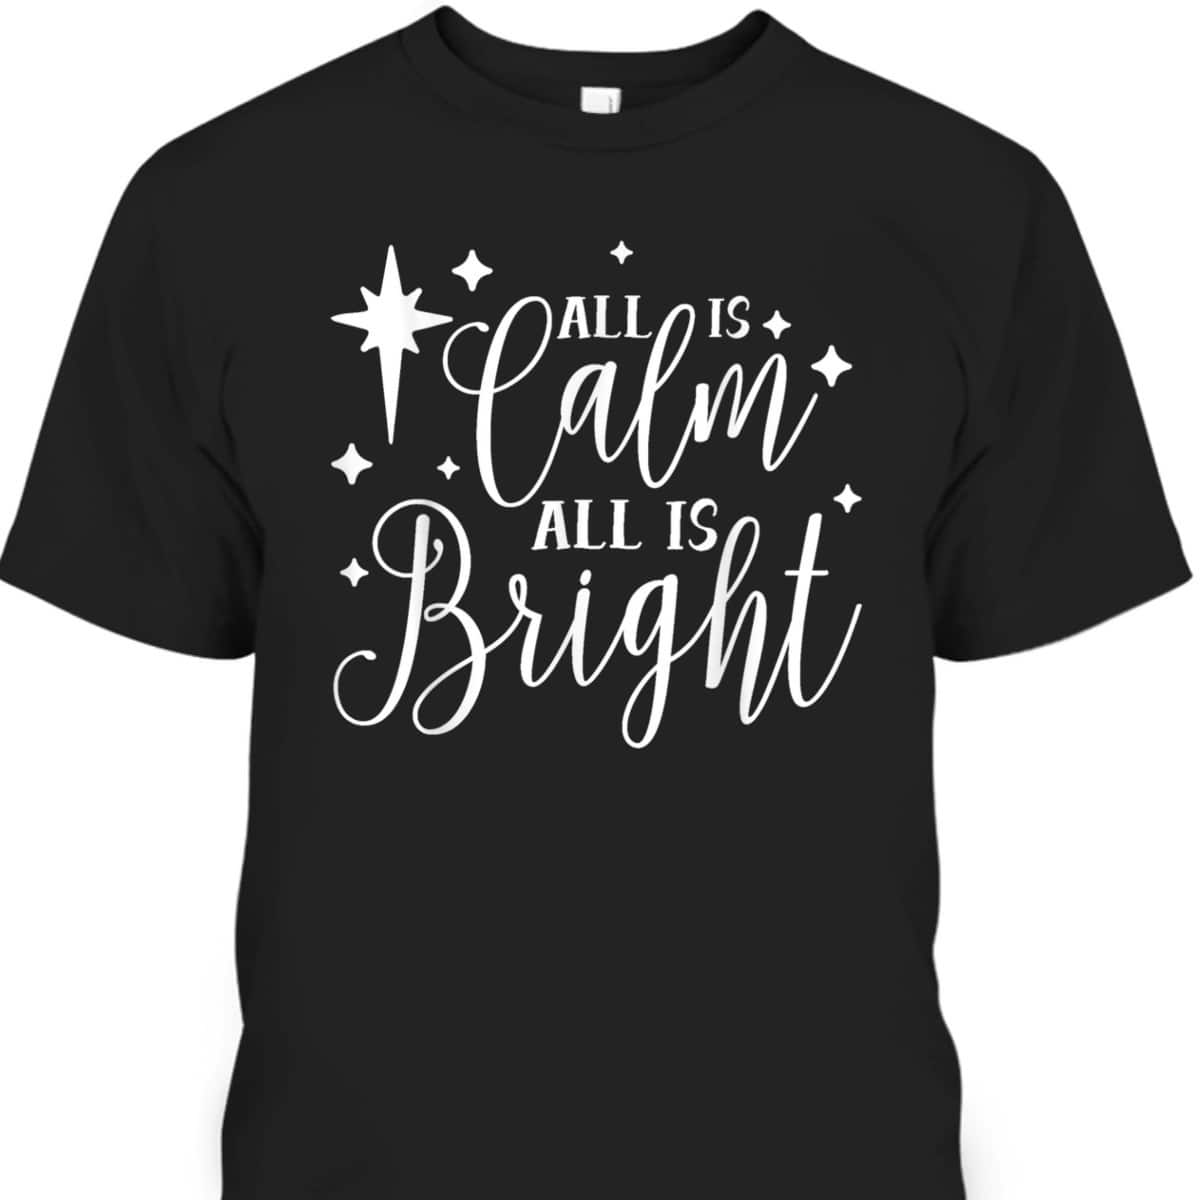 All Is Calm All Is Bright Silent Night Christian Christmas T-Shirt